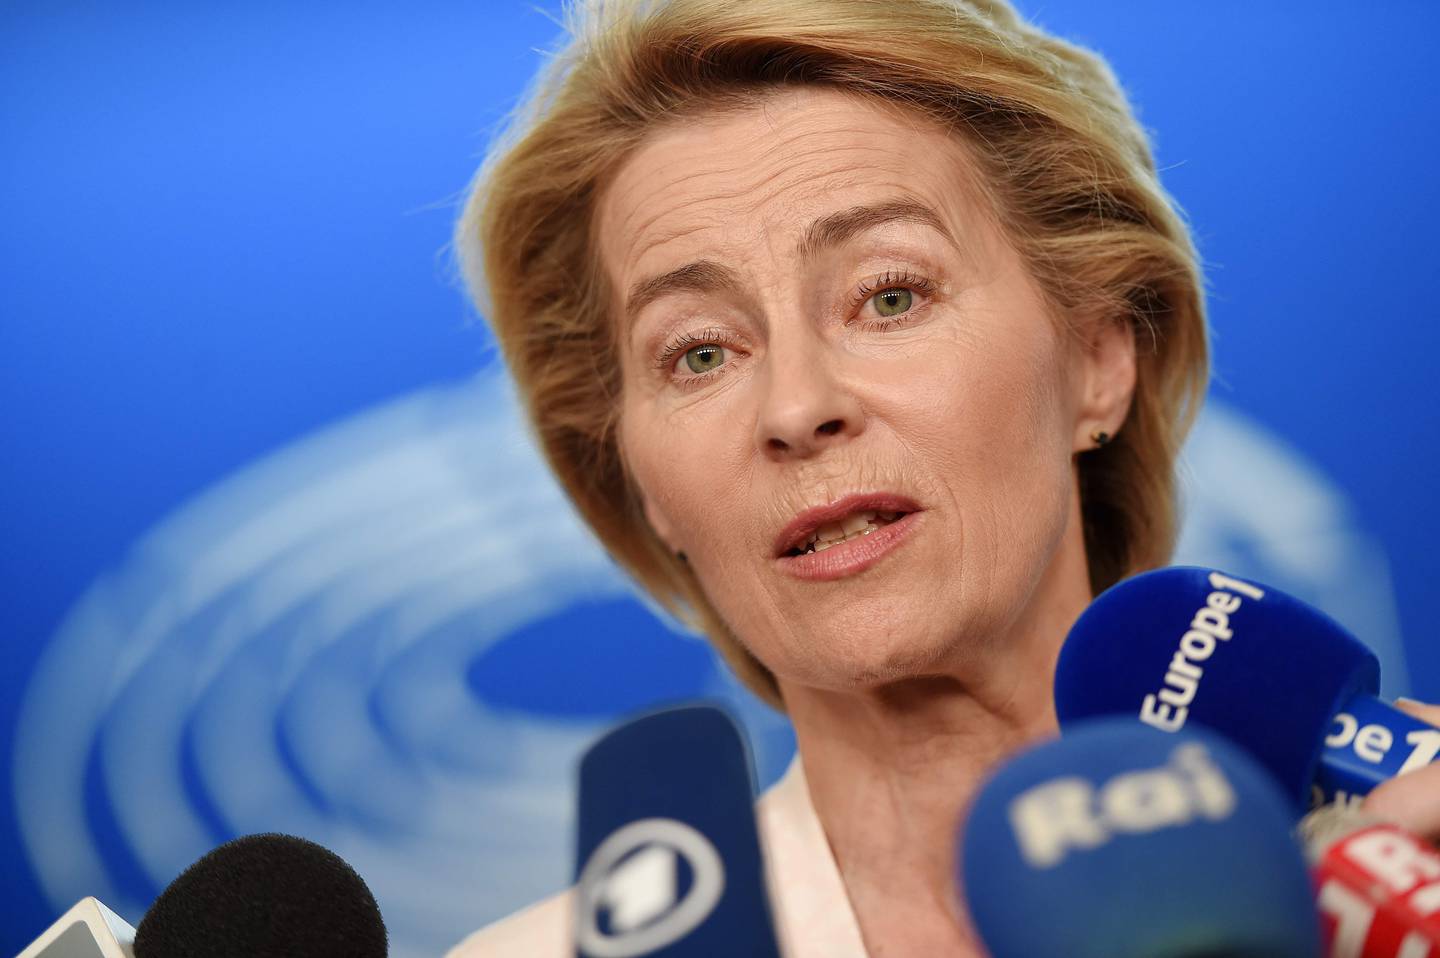 German Defence Minister Ursula von der Leyen speaks to journalists during the first plenary session of the newly elected European Assembly at the European Parliament on July 03, 2019 in Strasbourg, eastern France. (Photo by FREDERICK FLORIN / AFP)